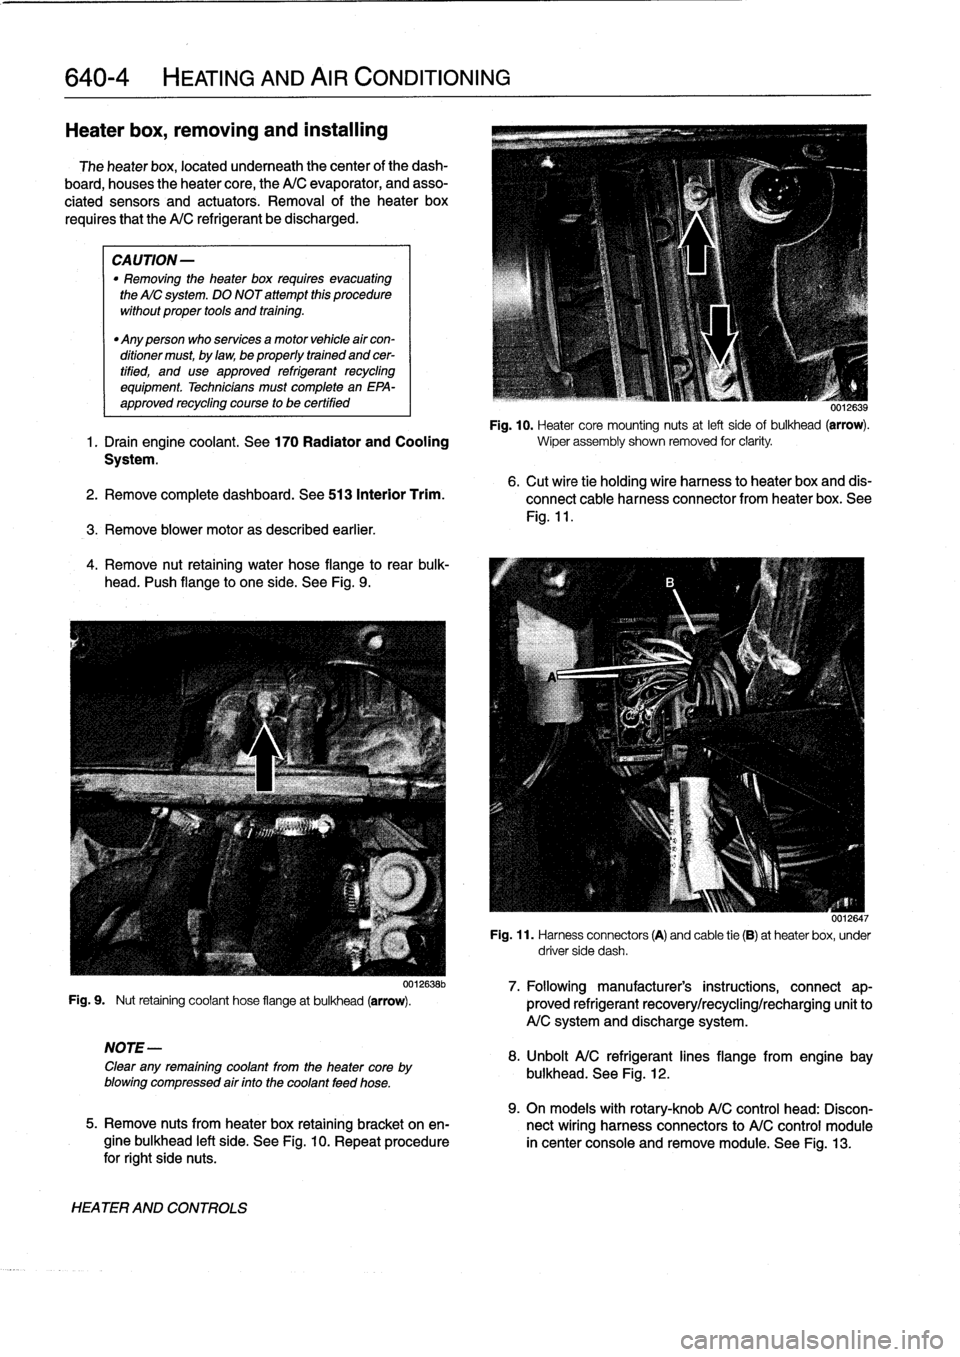 BMW 325i 1996 E36 Workshop Manual 
640-4

	

HEATING
AND
AIR
CONDITIONING

Heater
box,
removing
and
installing

The
heater
box,
located
underneath
thecenter
of
the
dash-

board,
houses
theheater
core,
the
A/C
evaporator,
and
asso-

ci